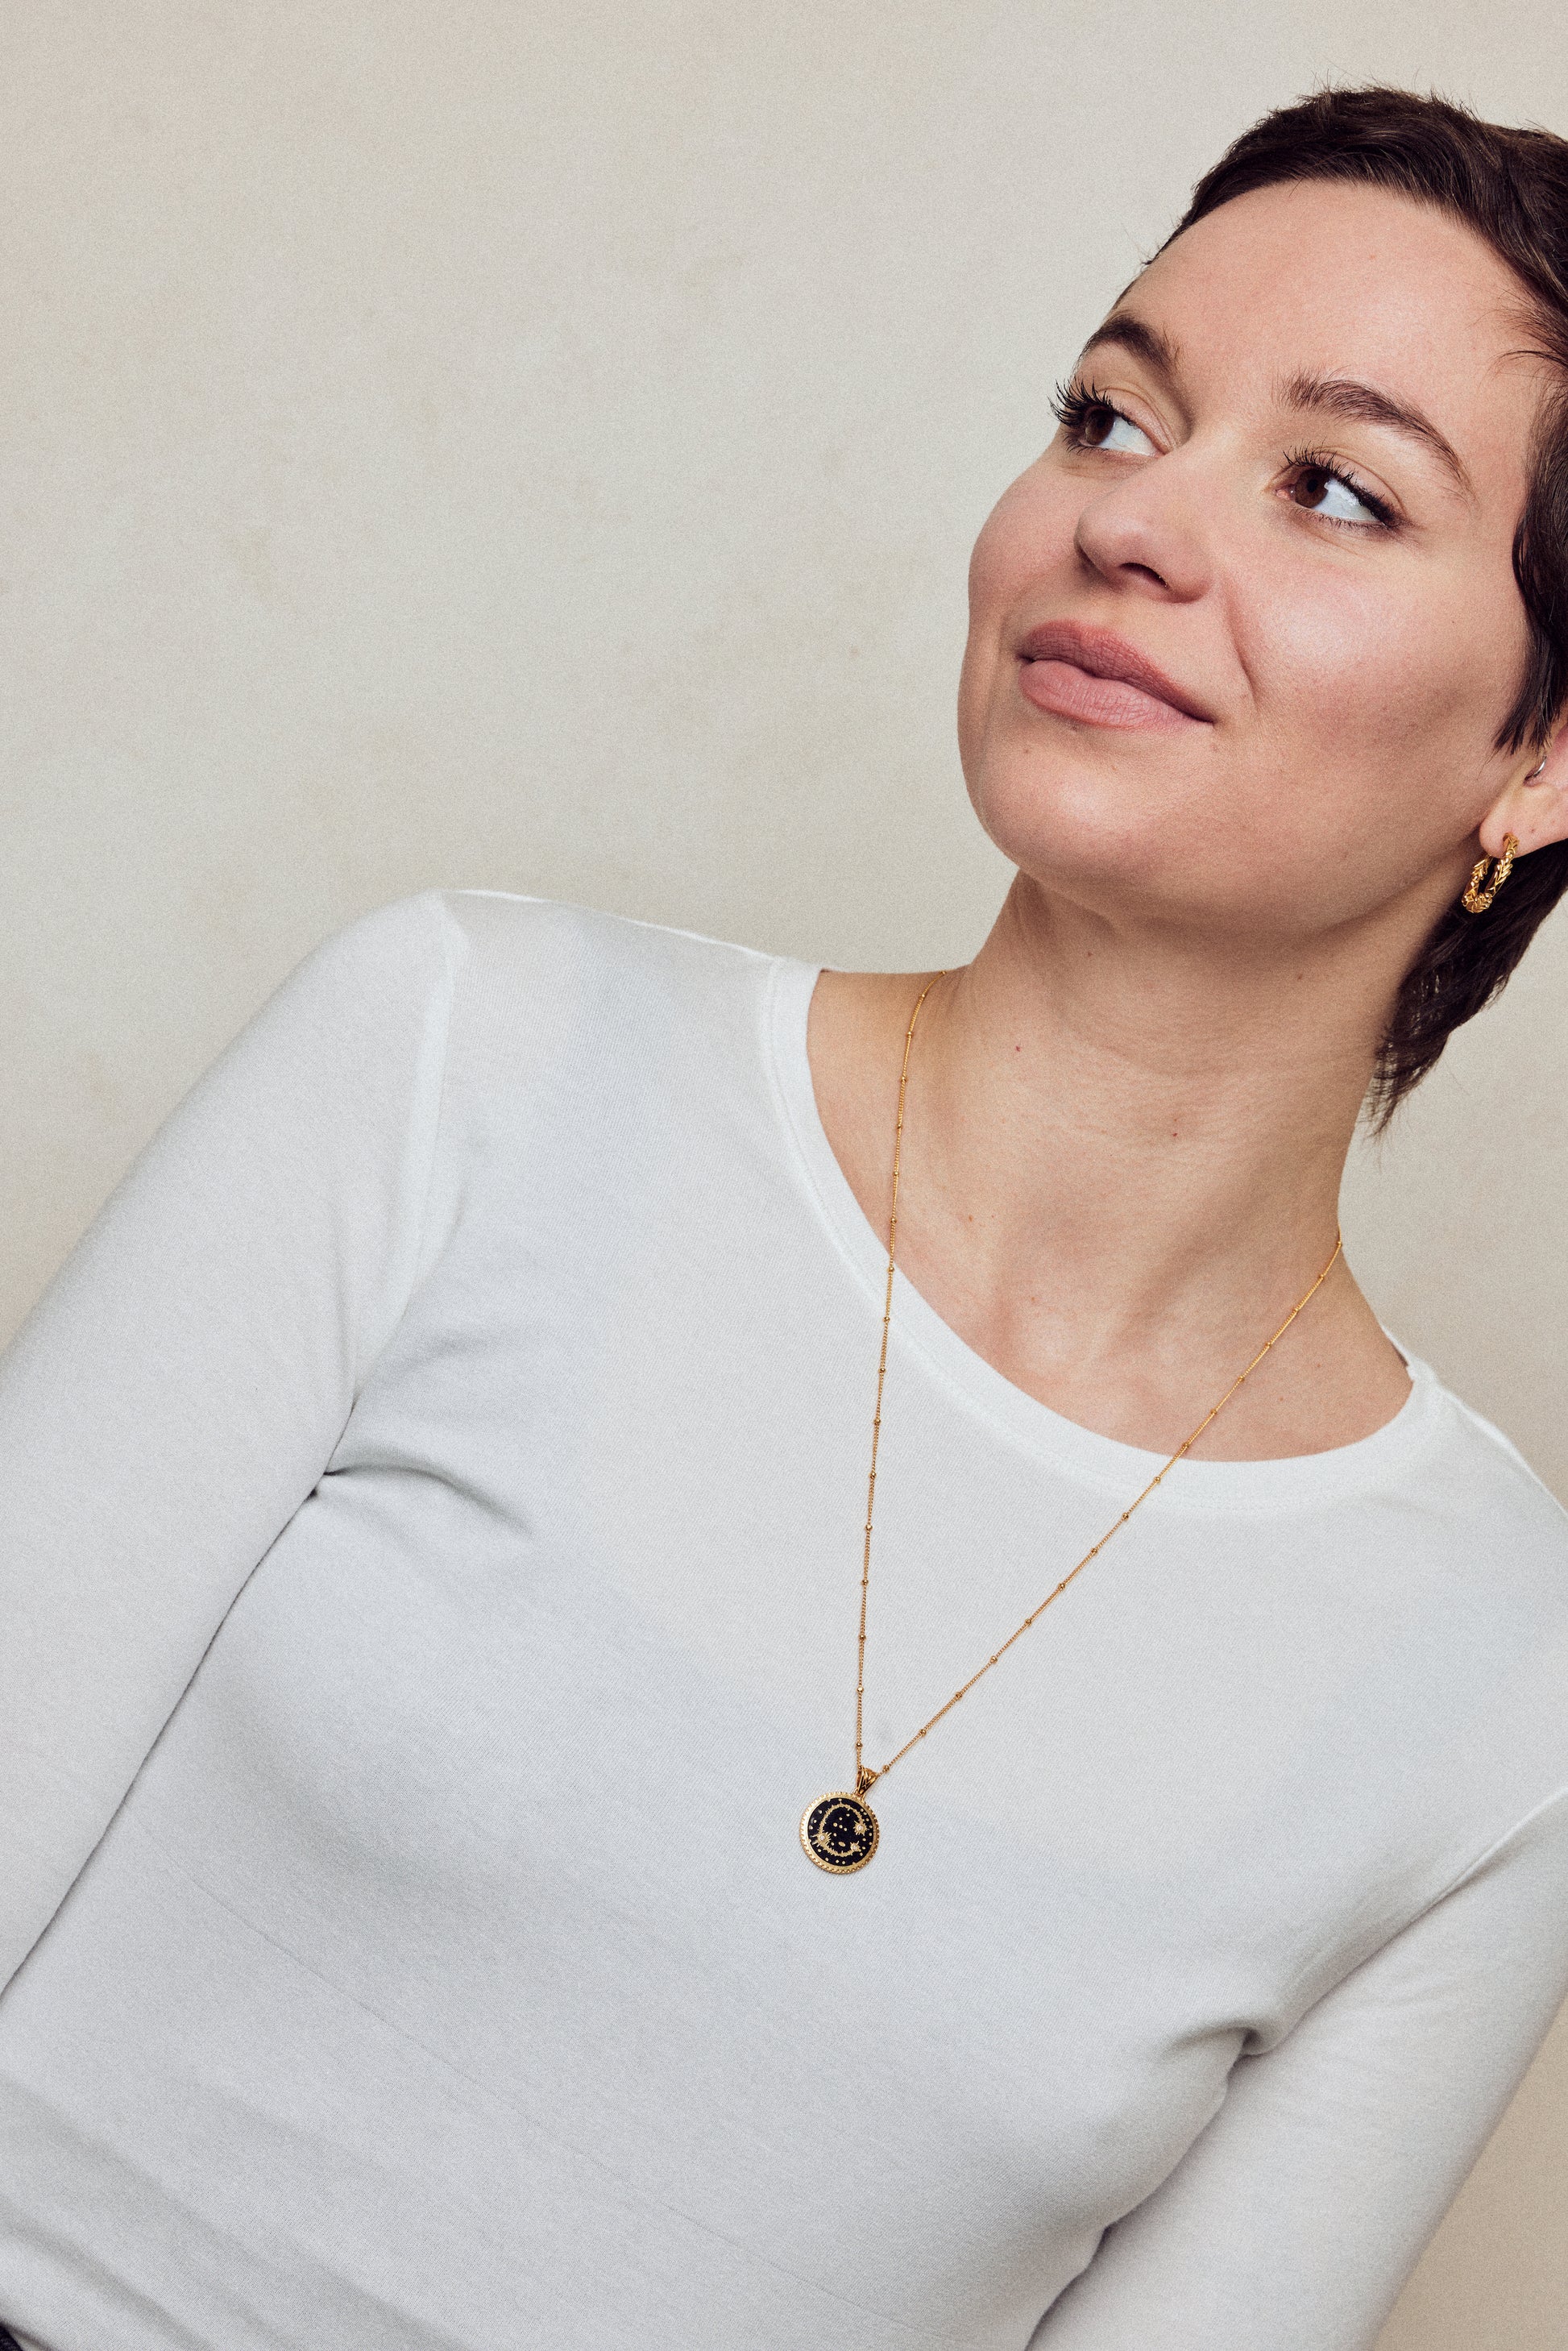 image of sparkler diamond initial necklace, letter C on long chain, on model in white top with short brown hair looking off to the left